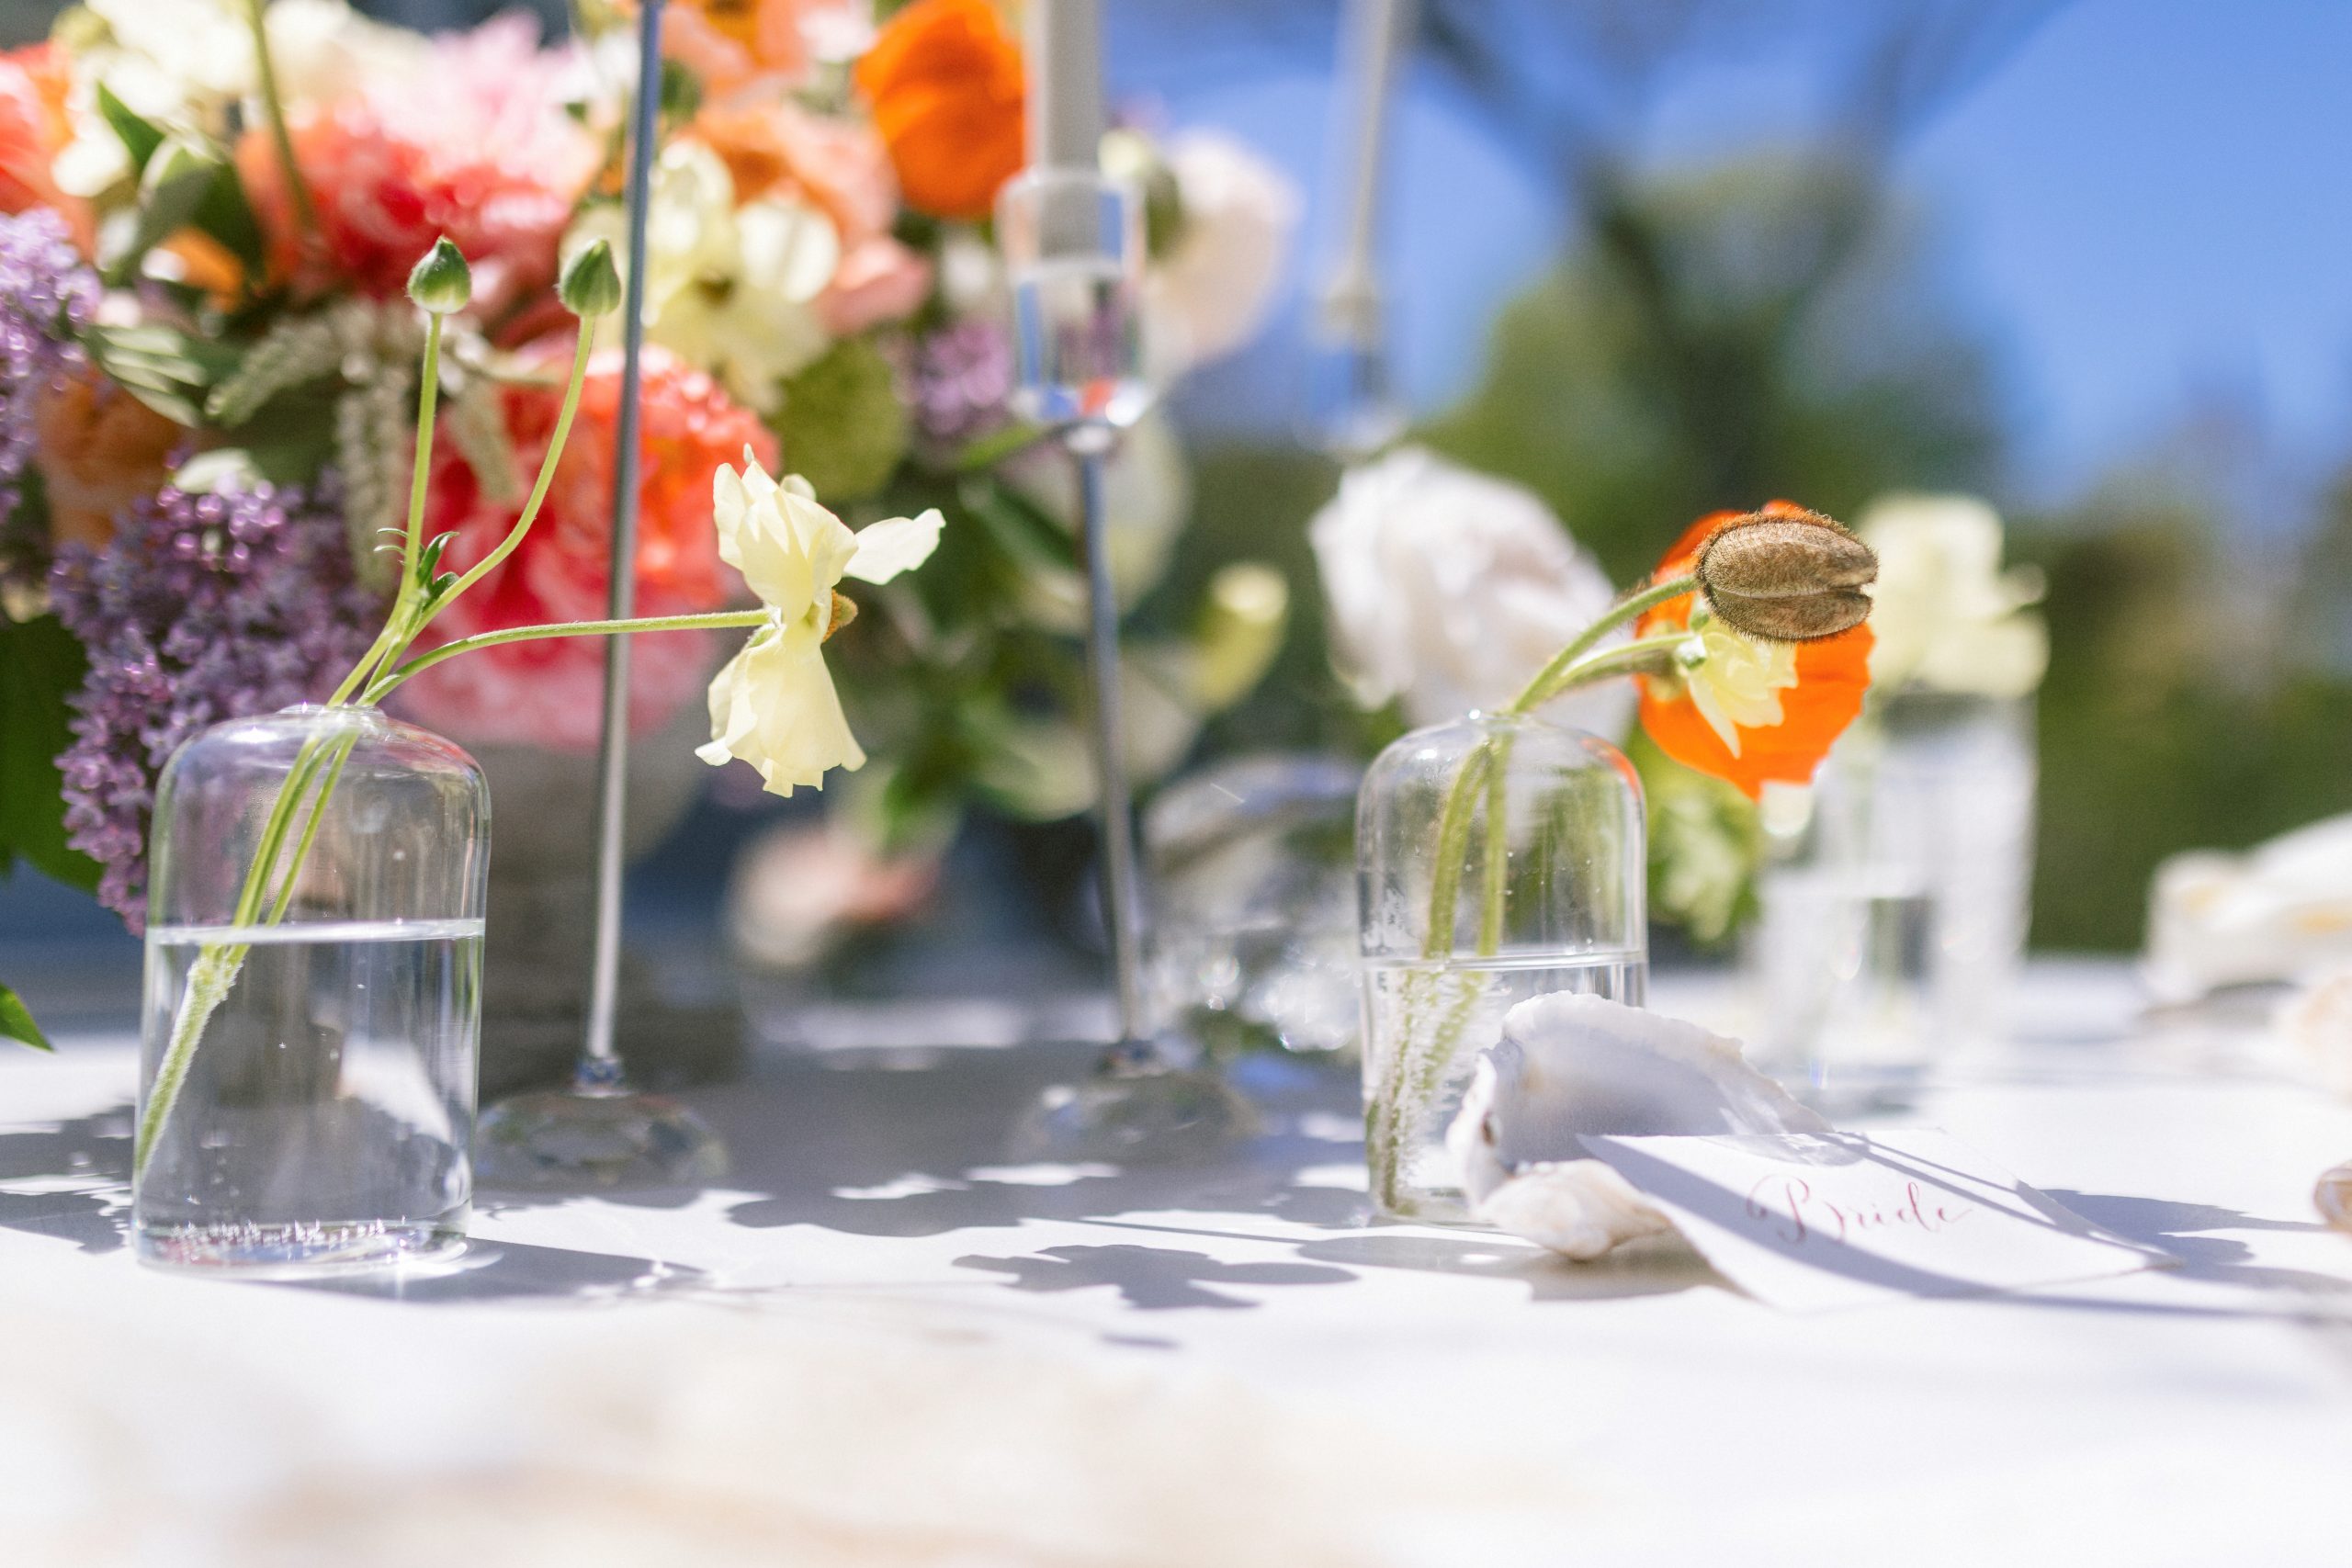 A simple orange flower in a clear glass on an ornate table setting